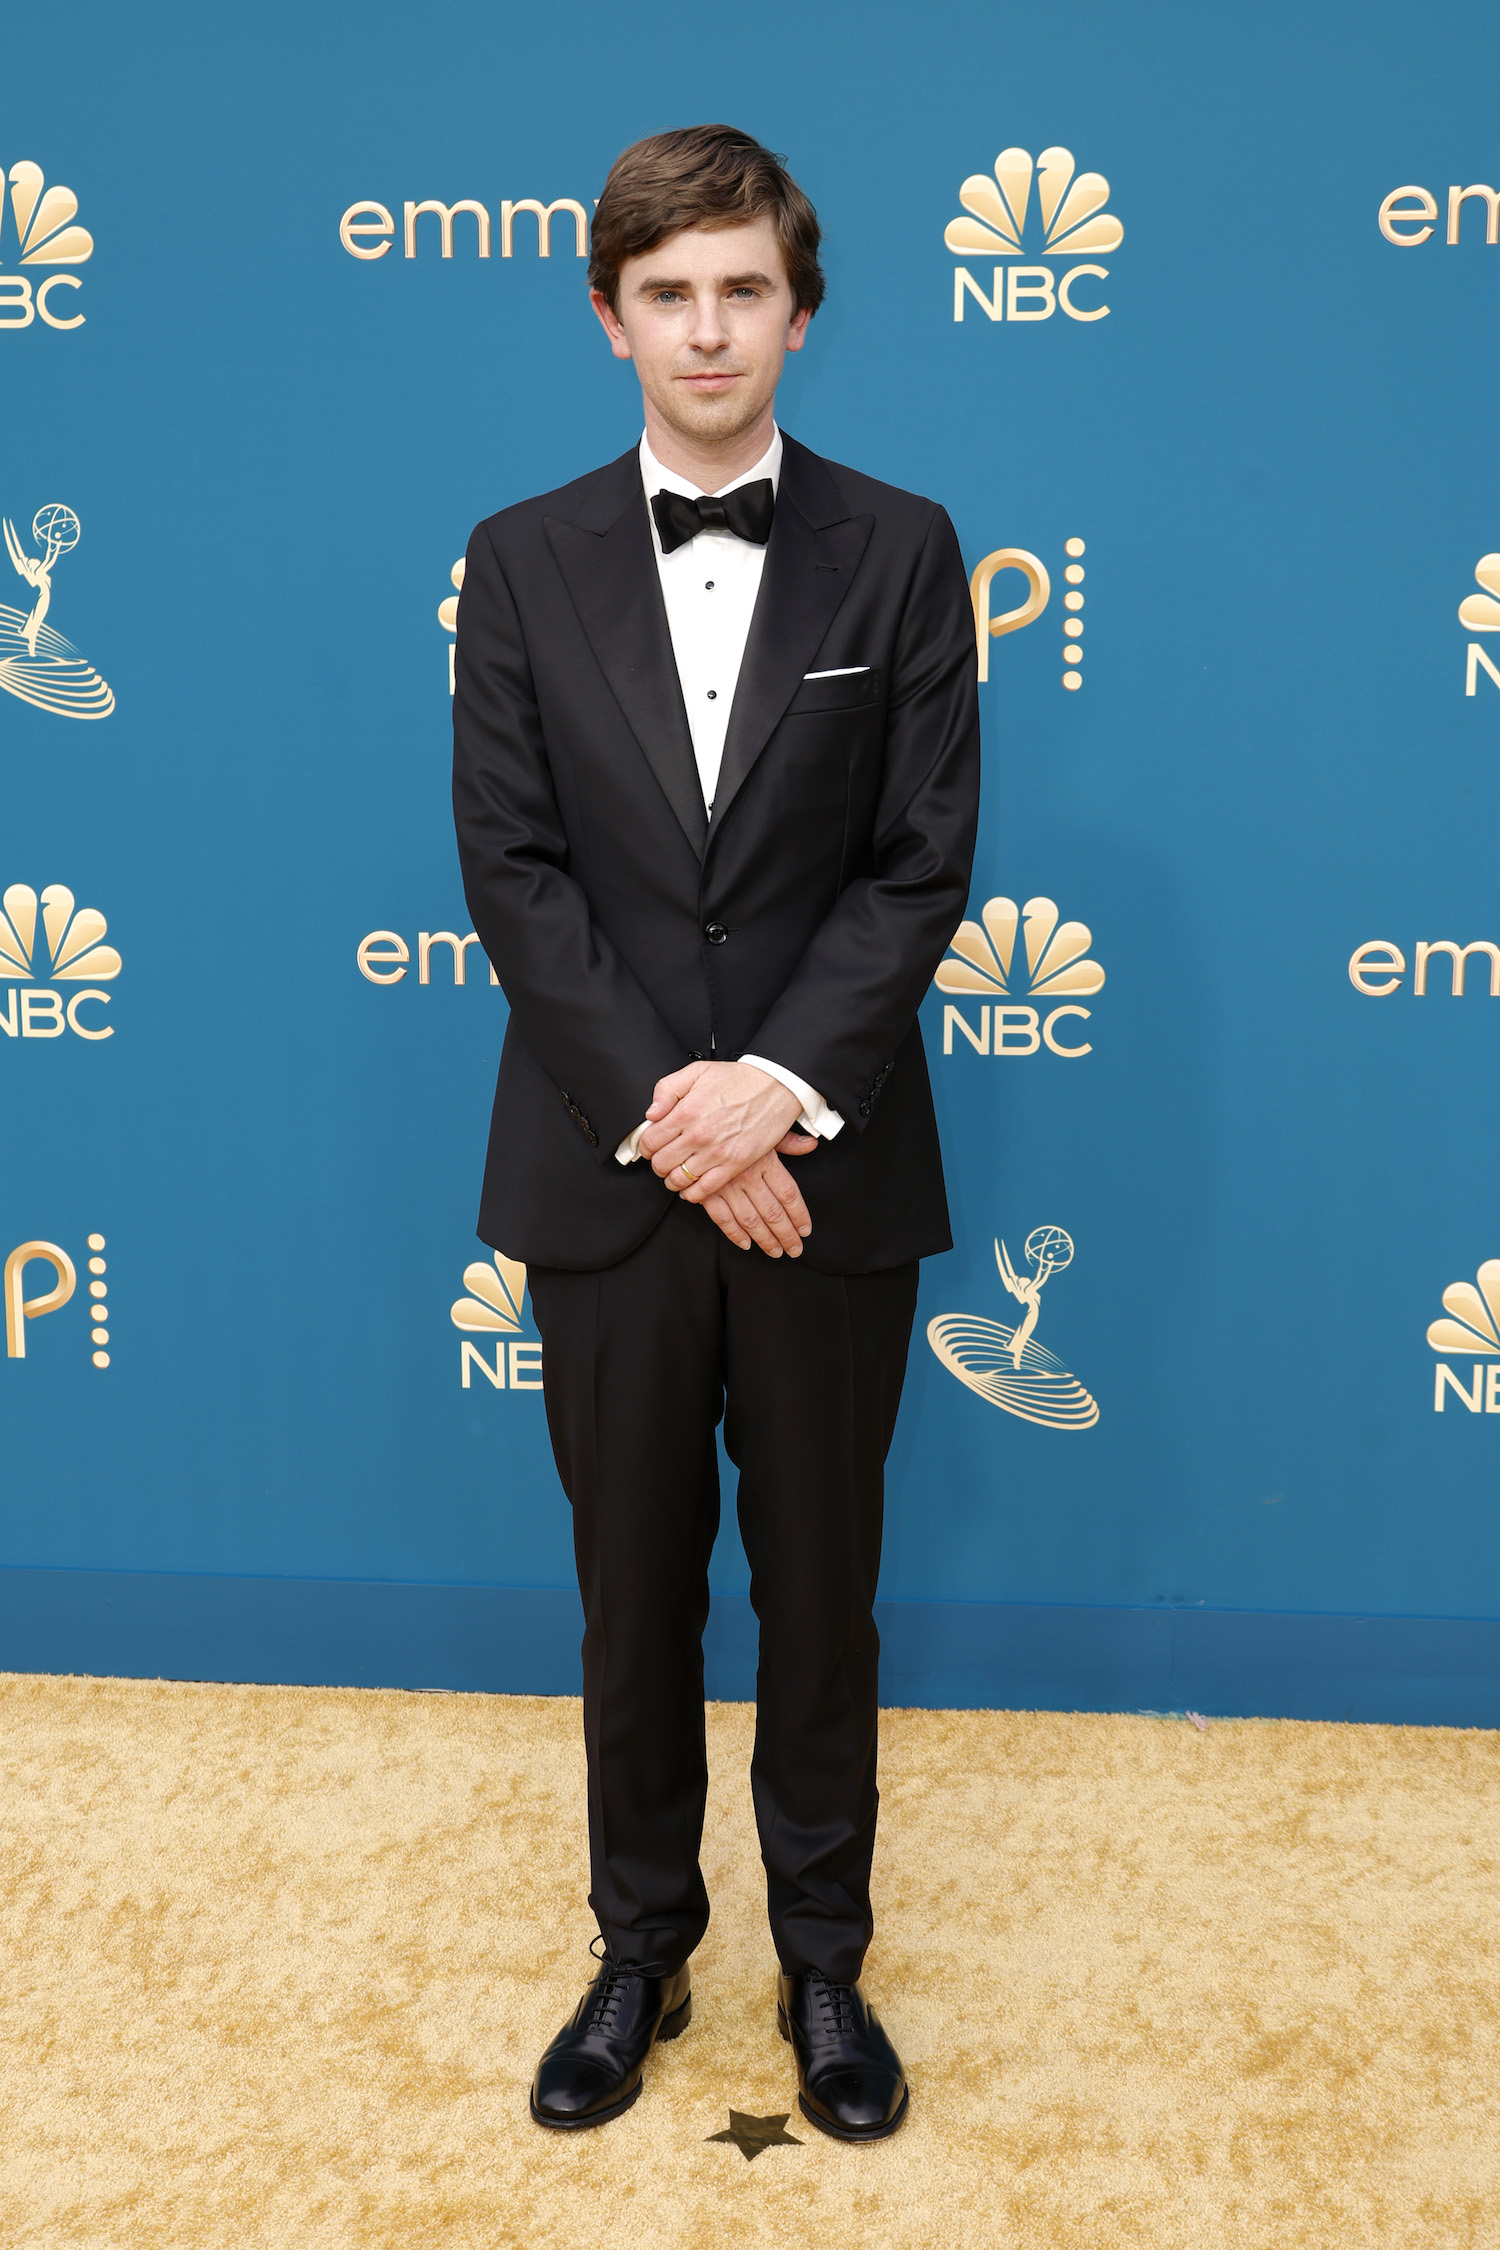 Freddie Highmore at the 2022 Emmys